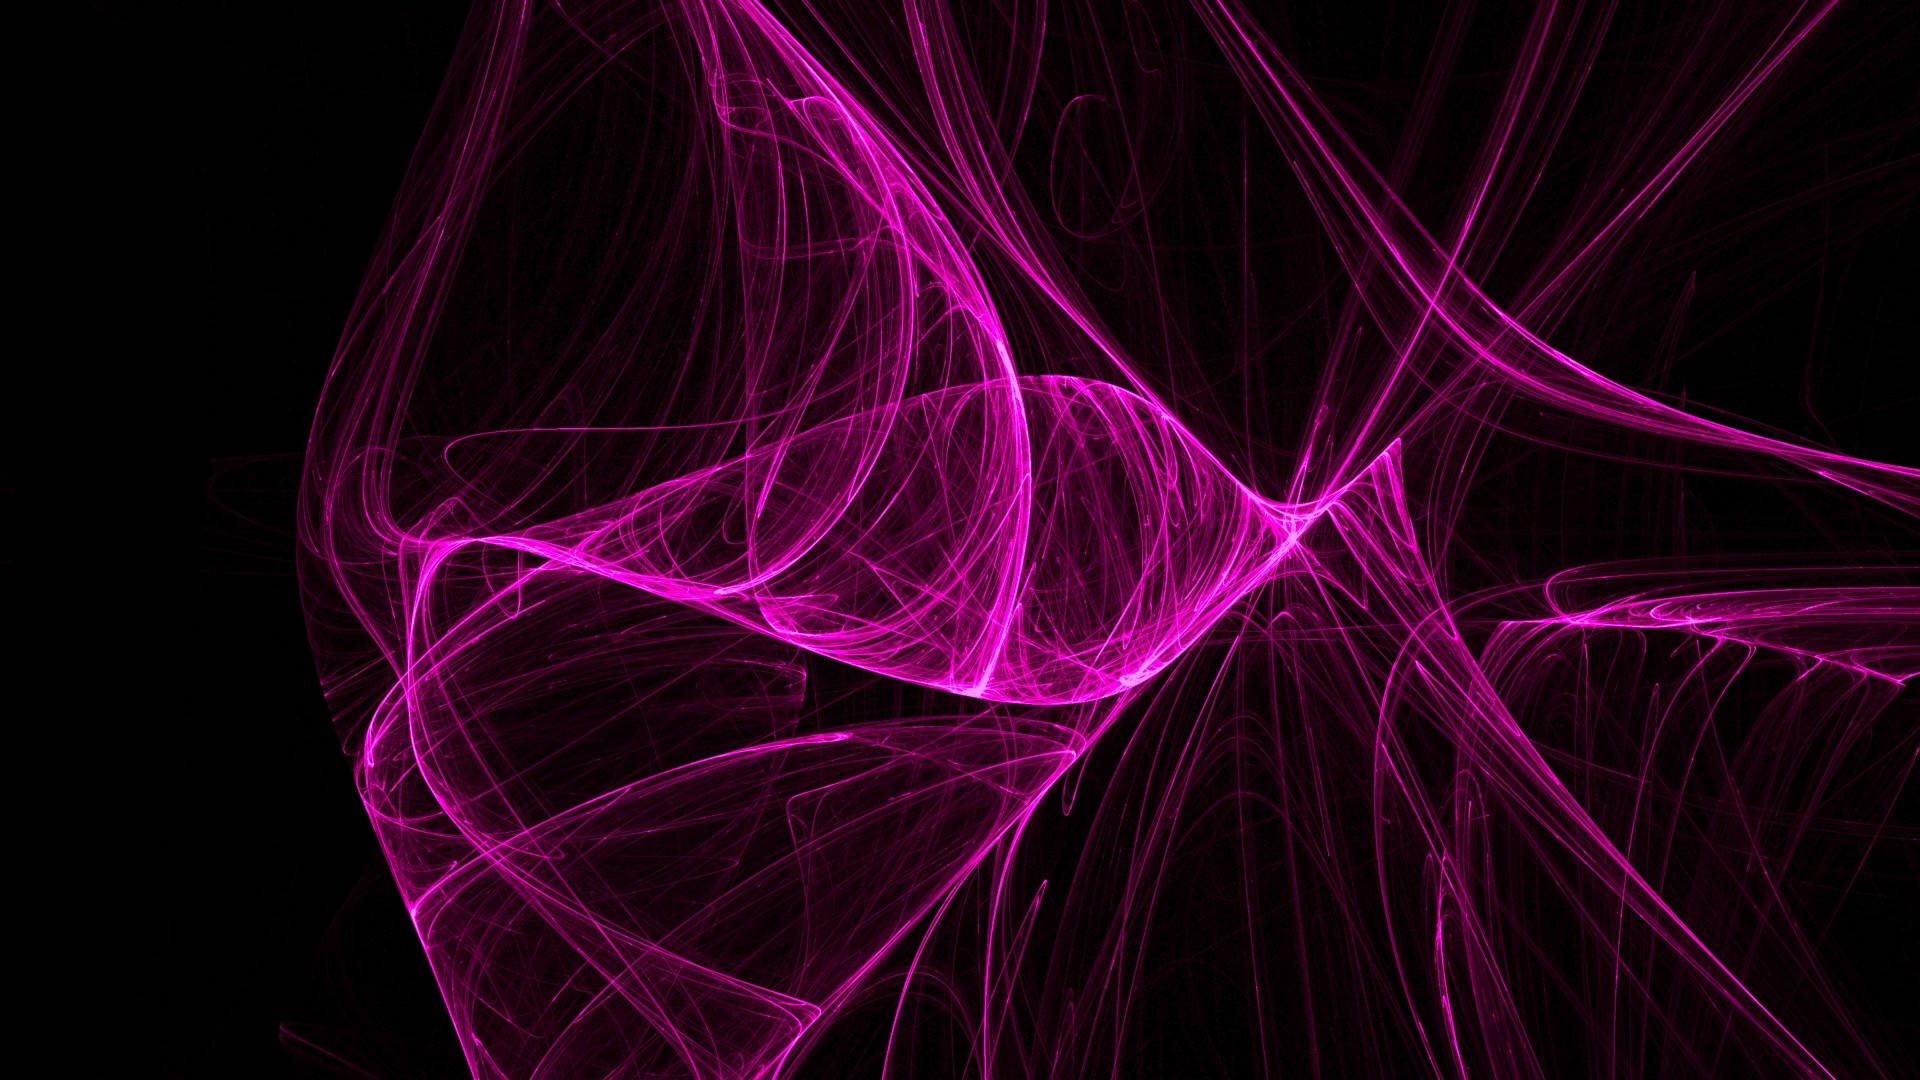 Black And Pink Aesthetic Abstract Fractal Wallpaper